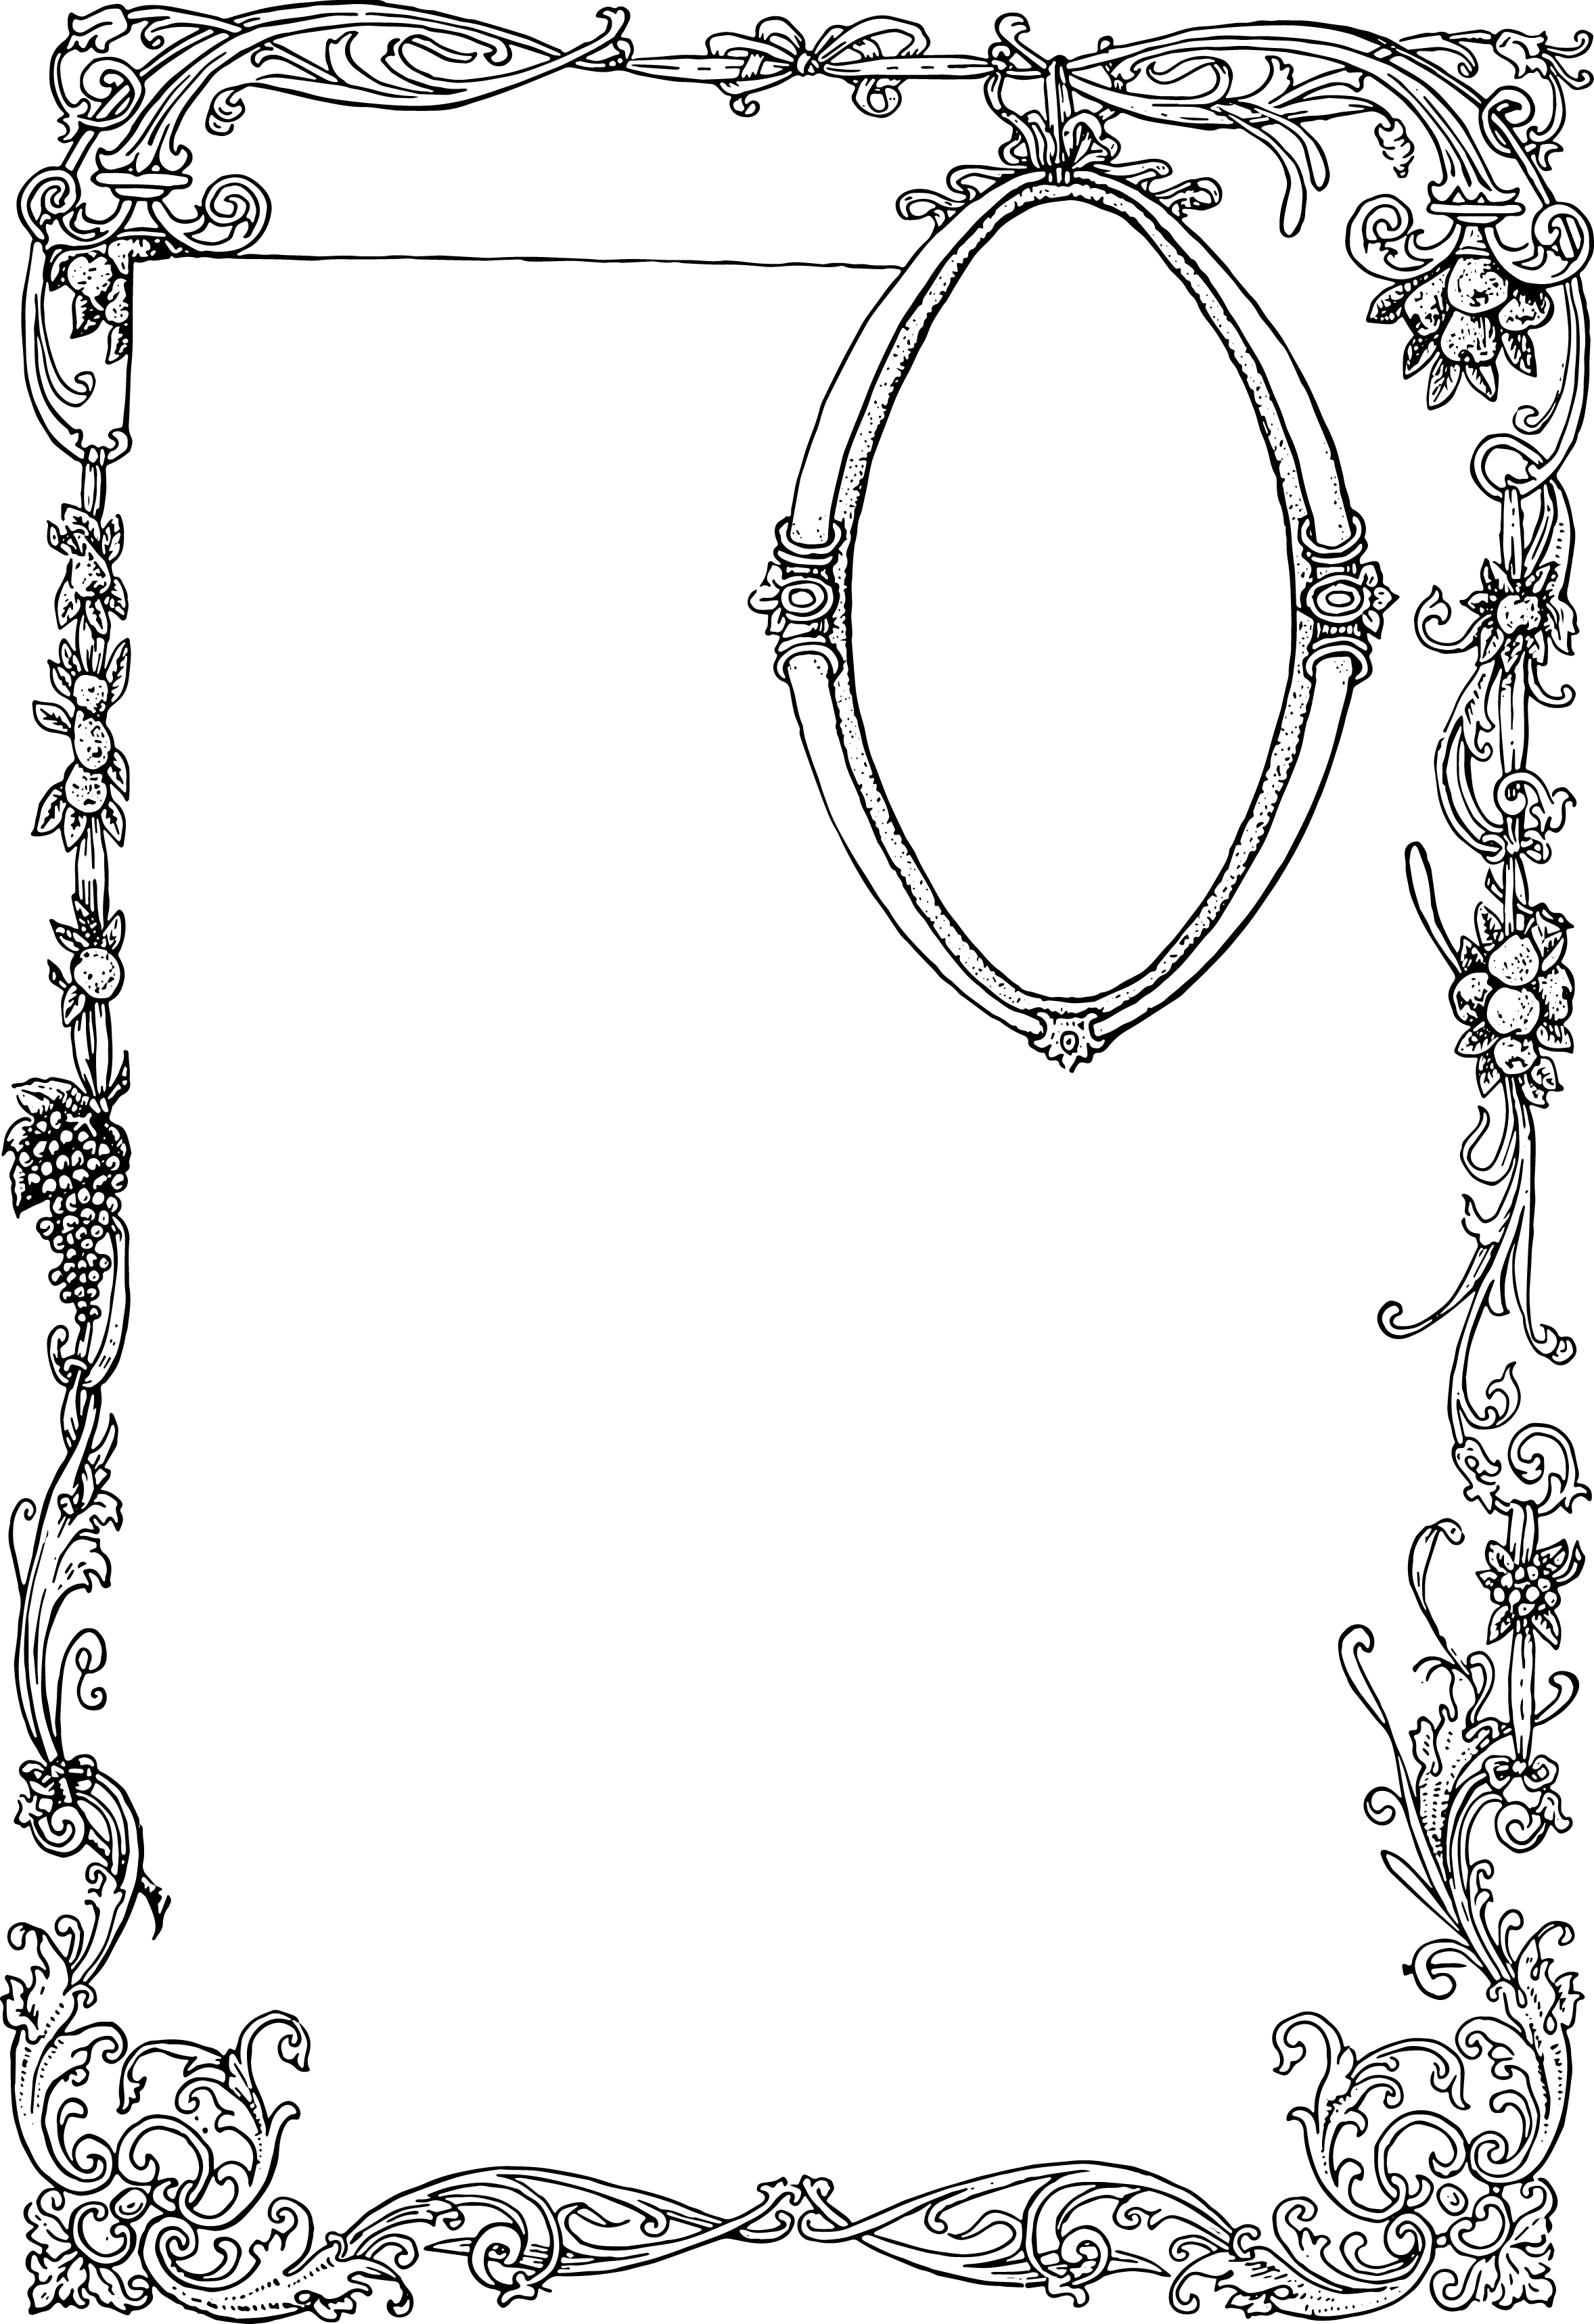 Stunning Free Vector Art - Ornate Border and Frame | Oh So Nifty 